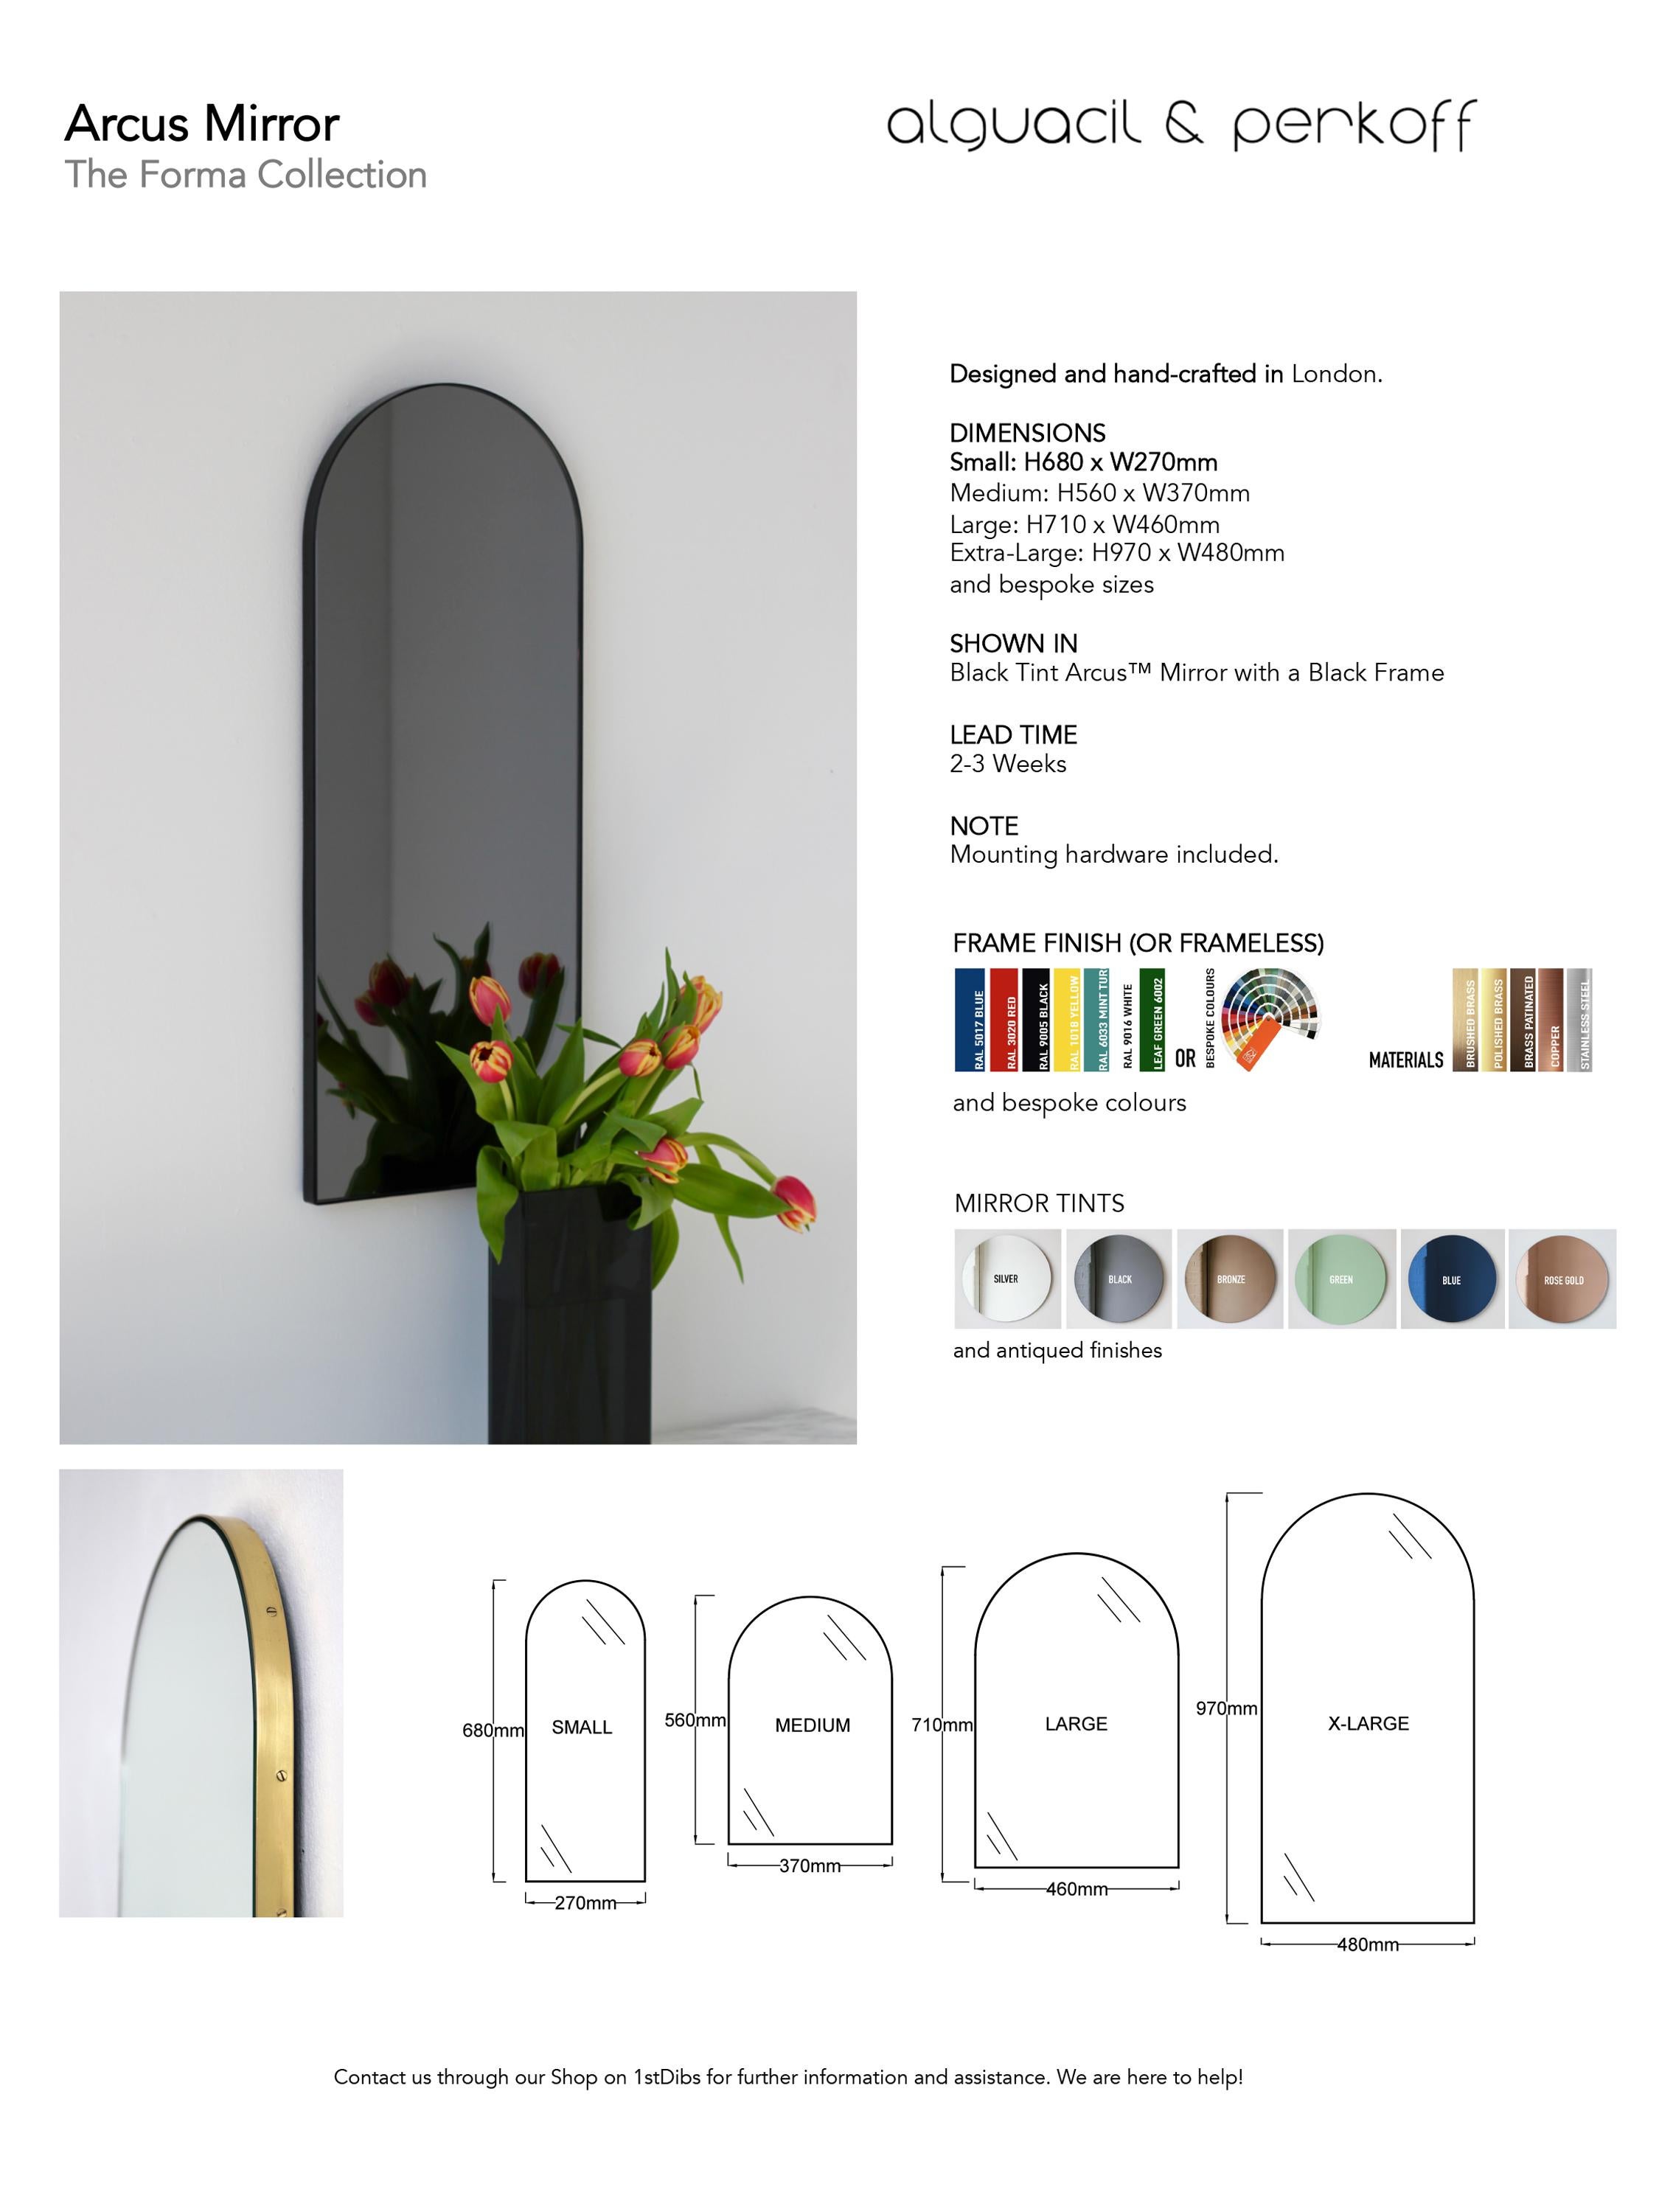 Arcus Arched Modern Contemporary Versatile Frameless Mirror, Large For Sale 5